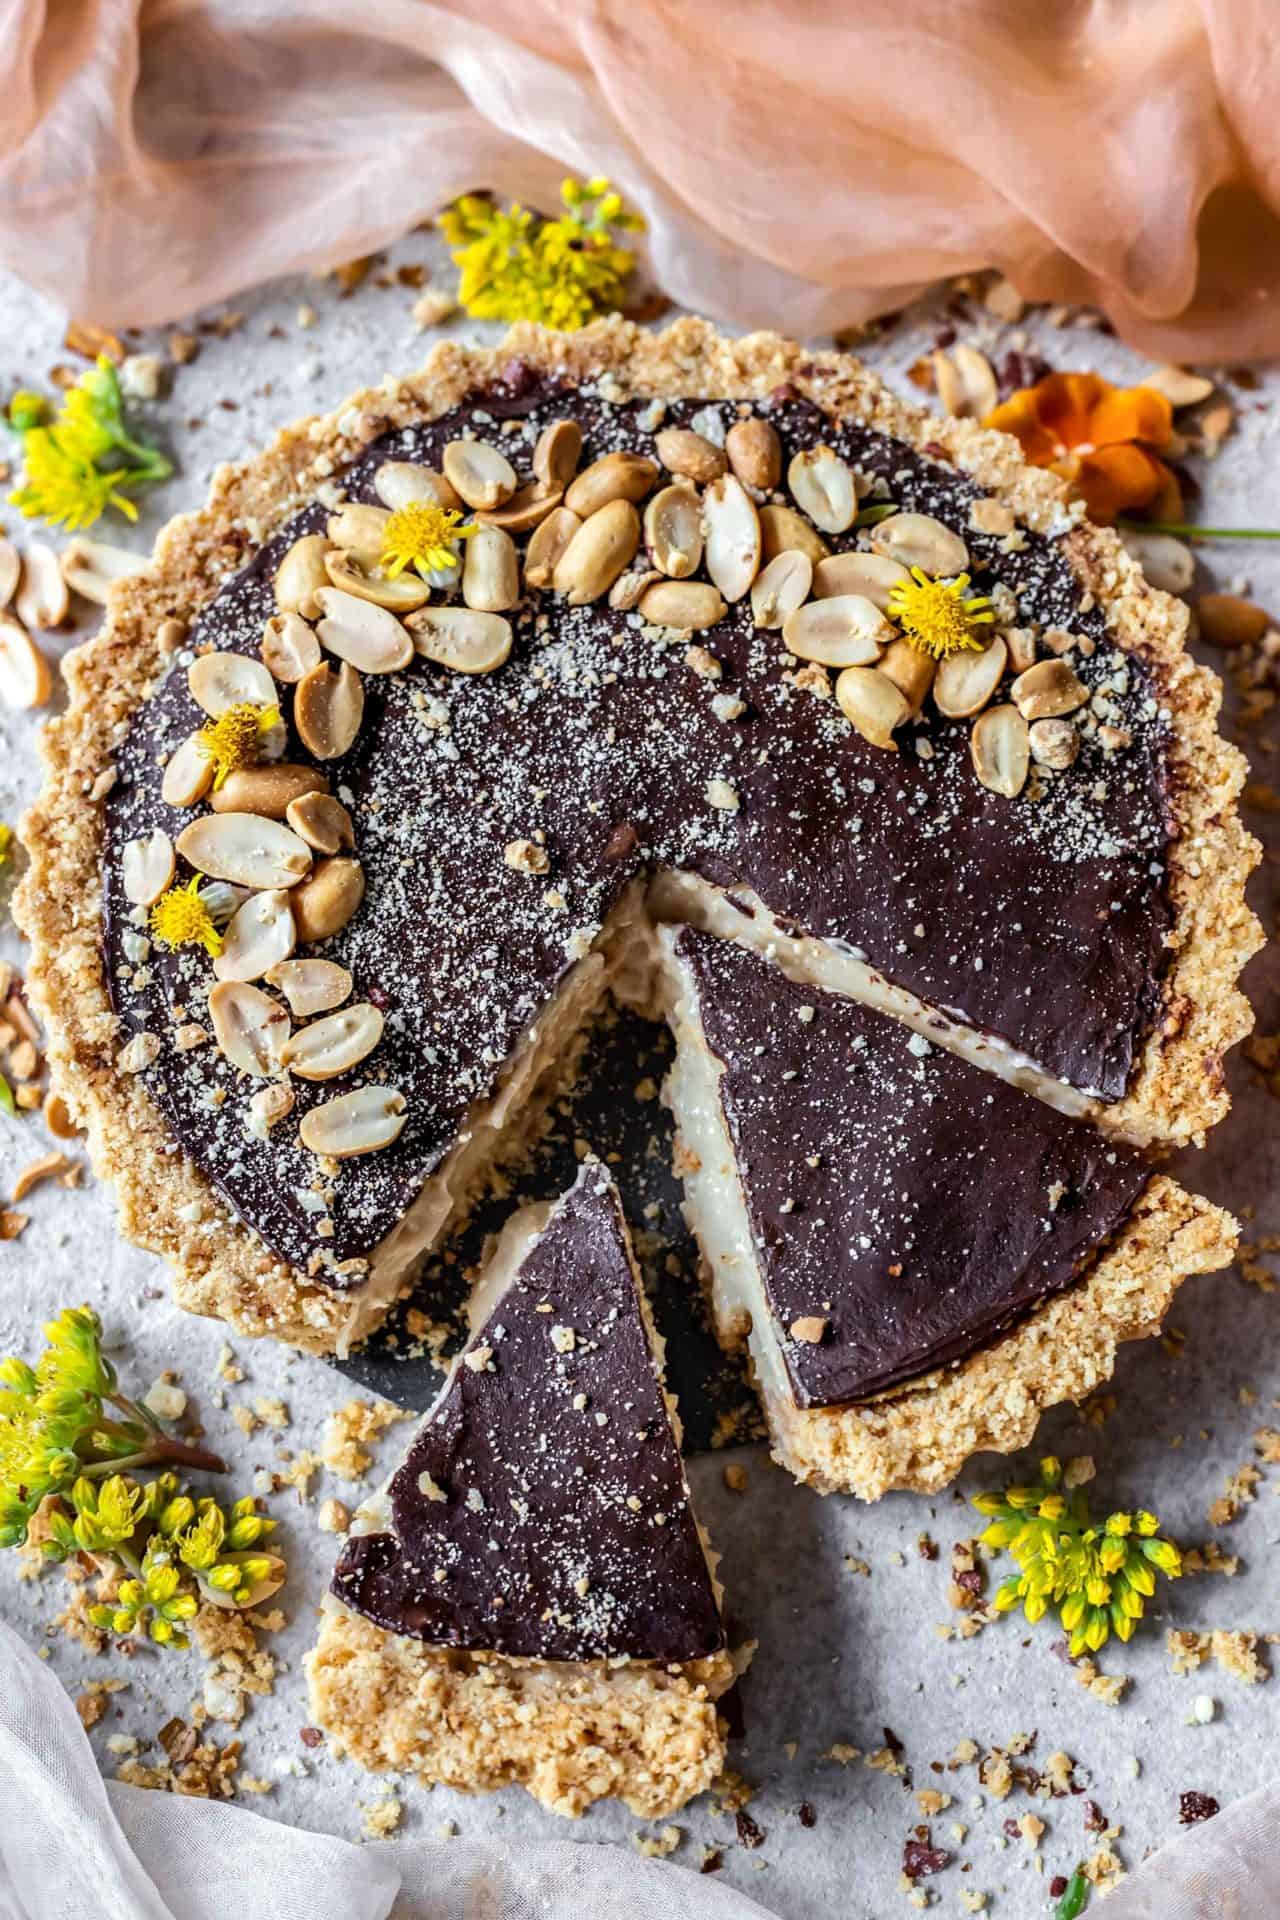 This No-Bake Peanut Butter Cheesecake Tart is super creamy, perfectly sweetened, rich, flavorful and so delicious! Plus it is low FODMAP and gluten-free.